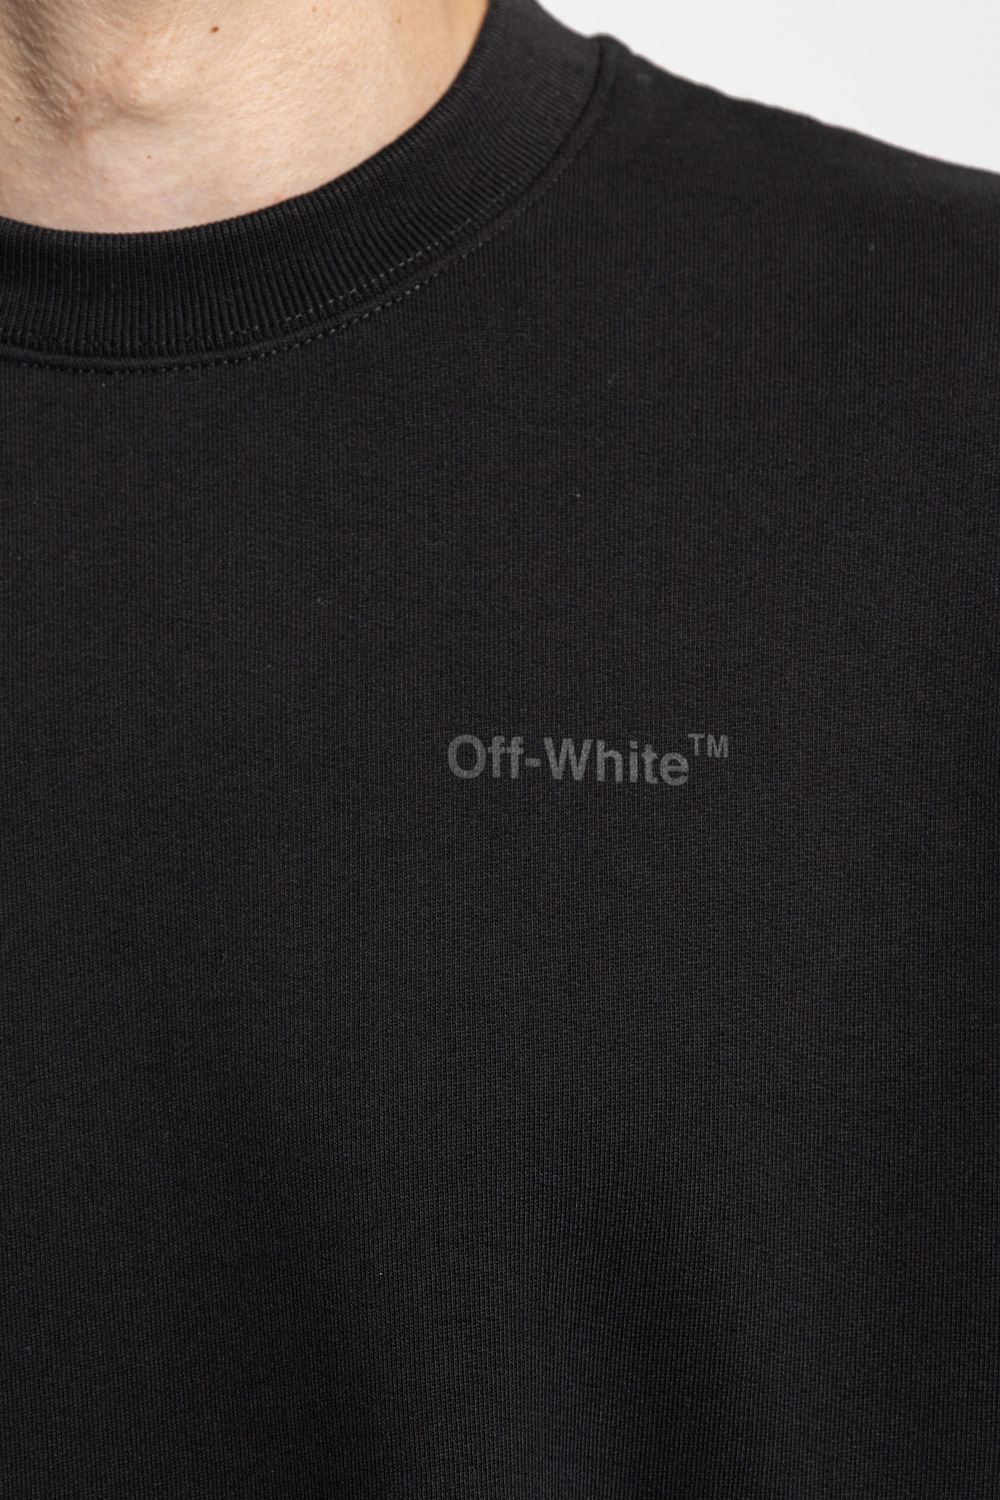 Off-White the hottest trend of the season